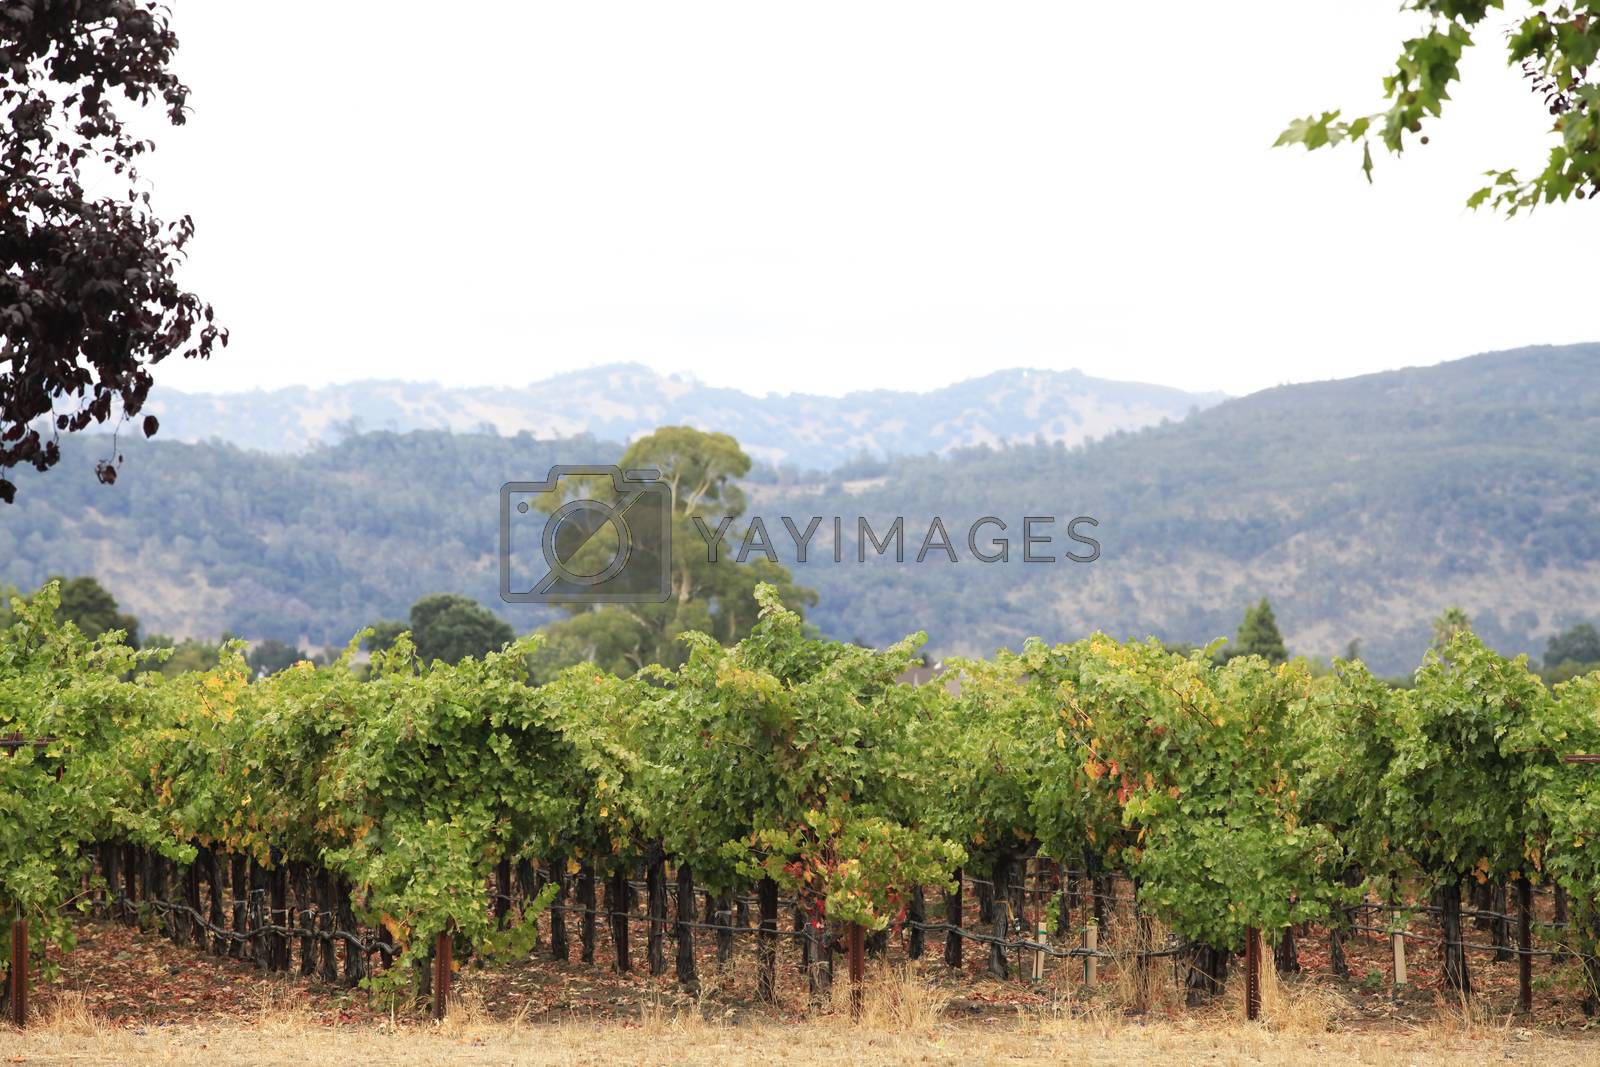 Royalty free image of Napa Valley by friday